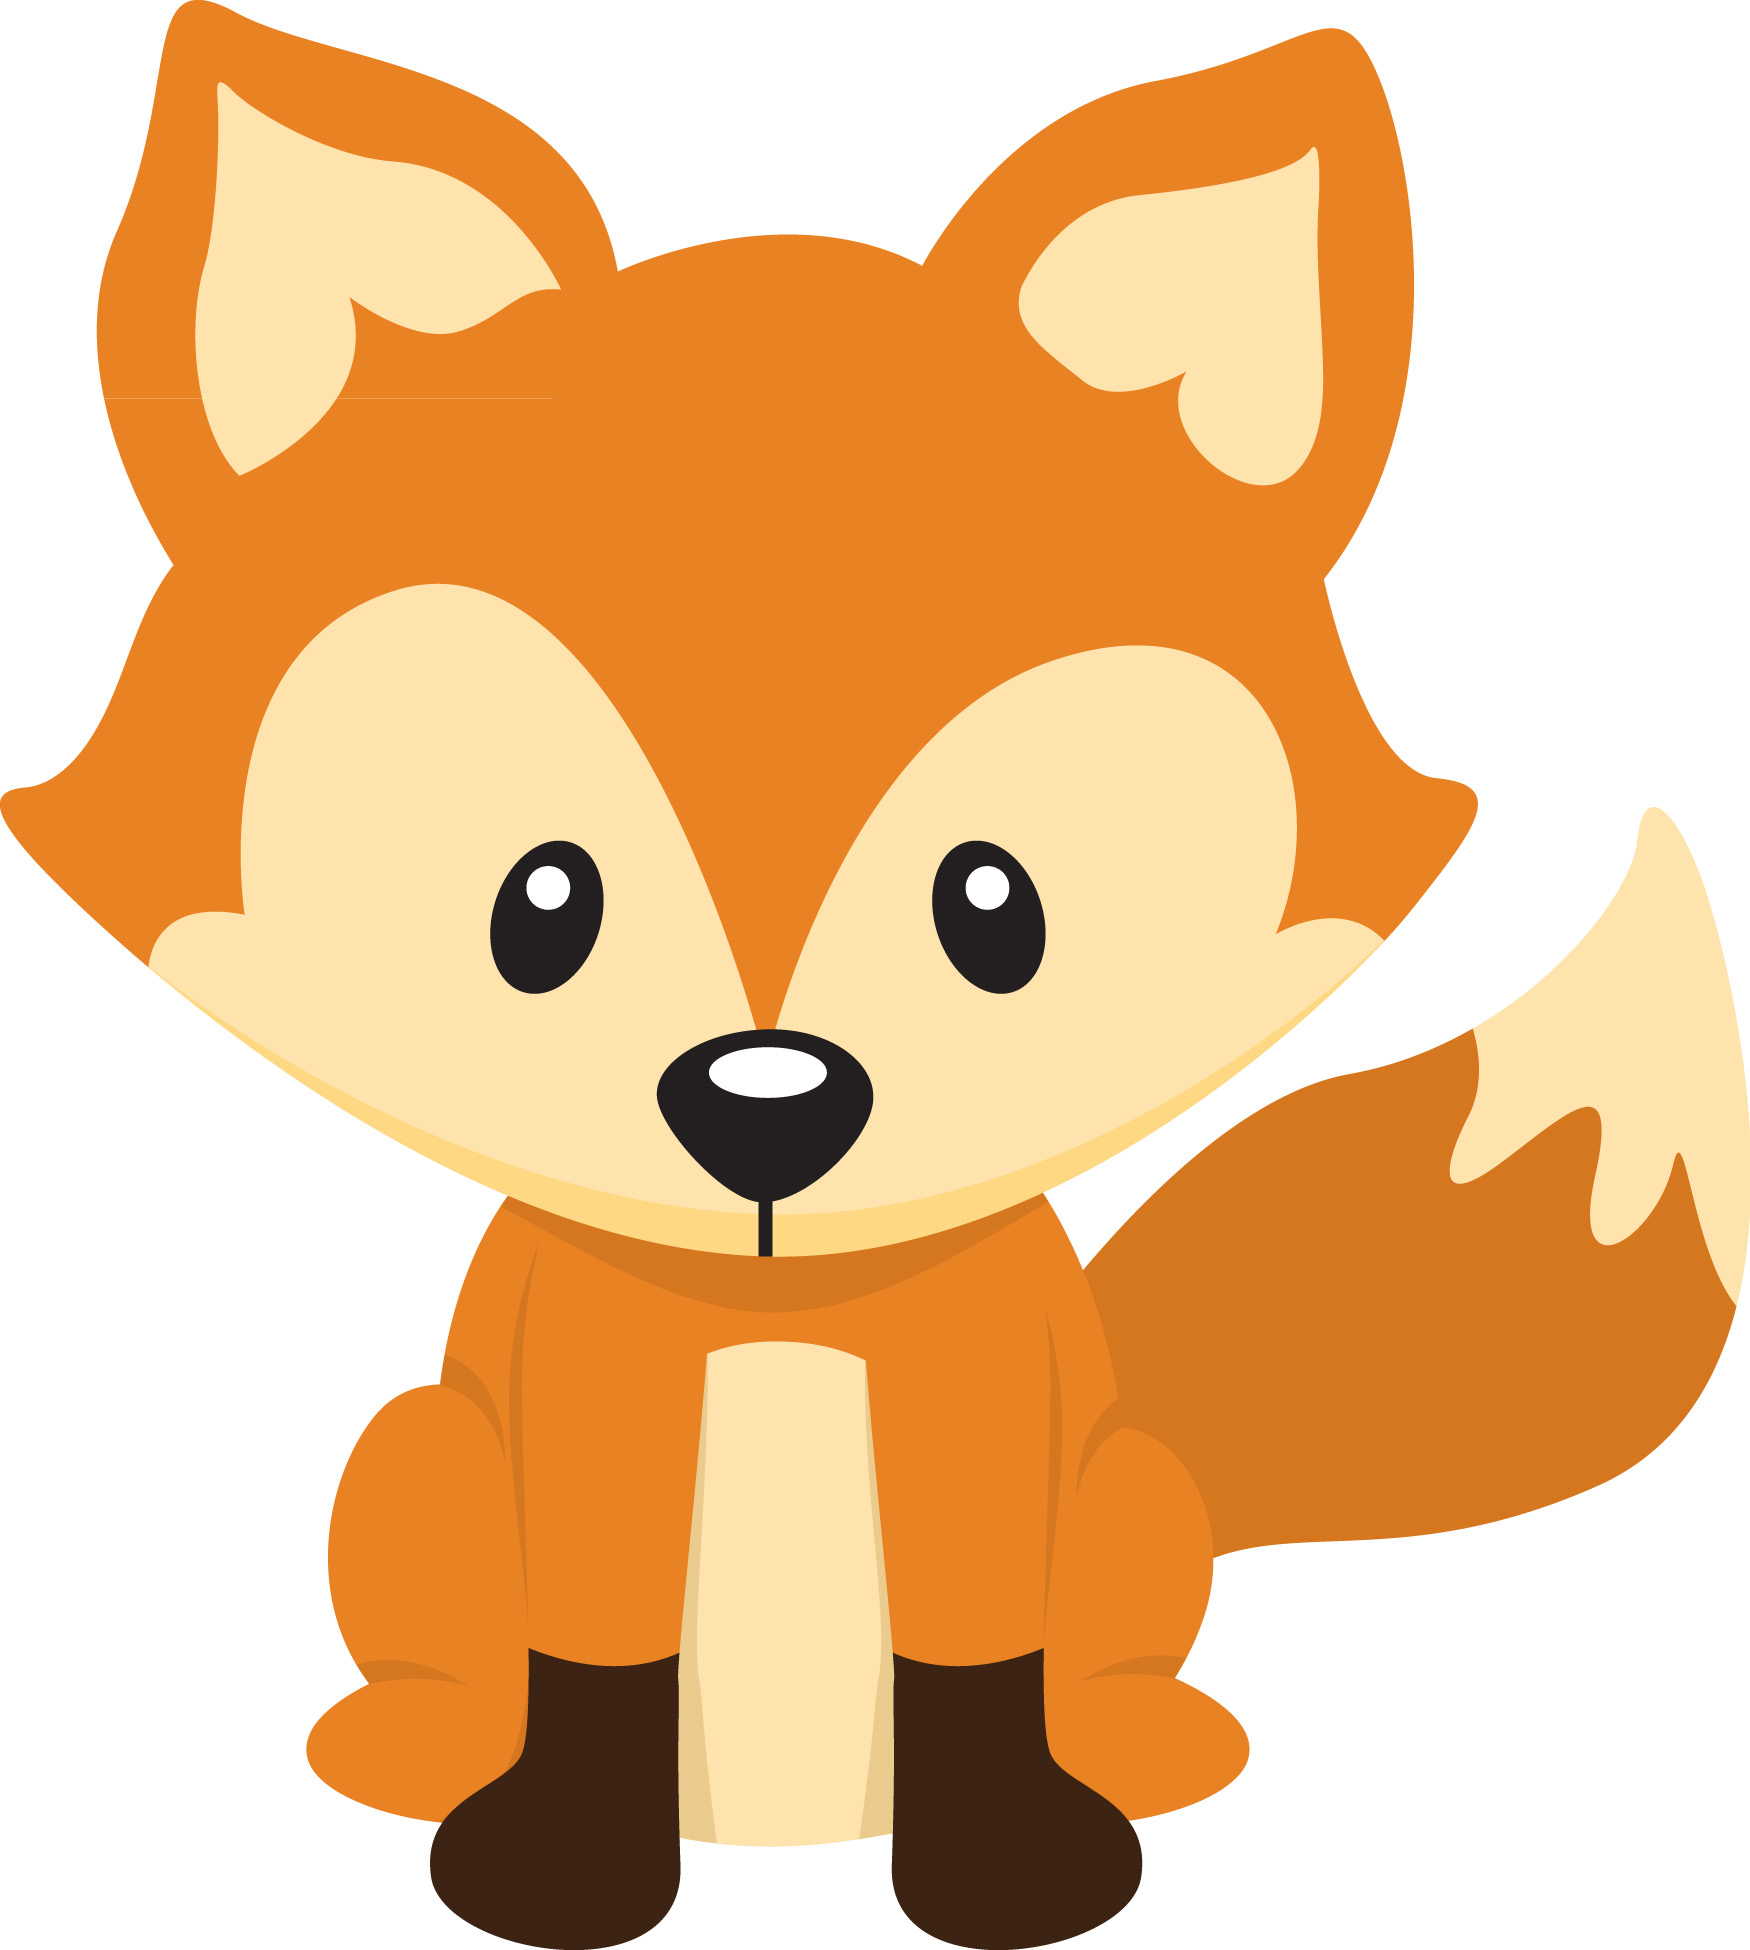 Fox   Free Images At Clker Com   Vector Clip Art Online Royalty Free